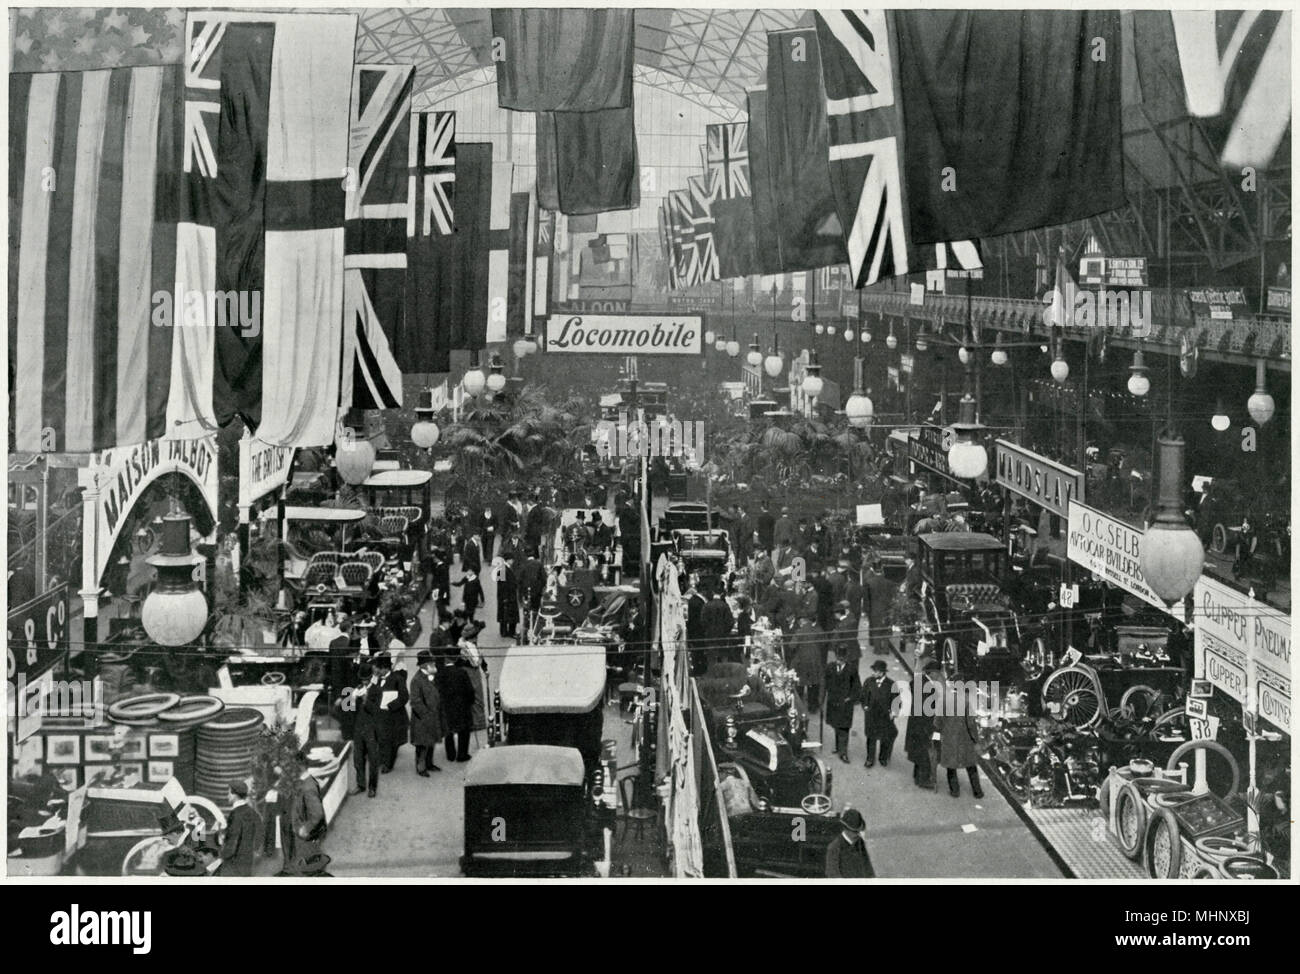 General view of the motor show in the Agricultural Hall, Islington in London, organised by the Automobile Club.       Date: circa 1903 Stock Photo